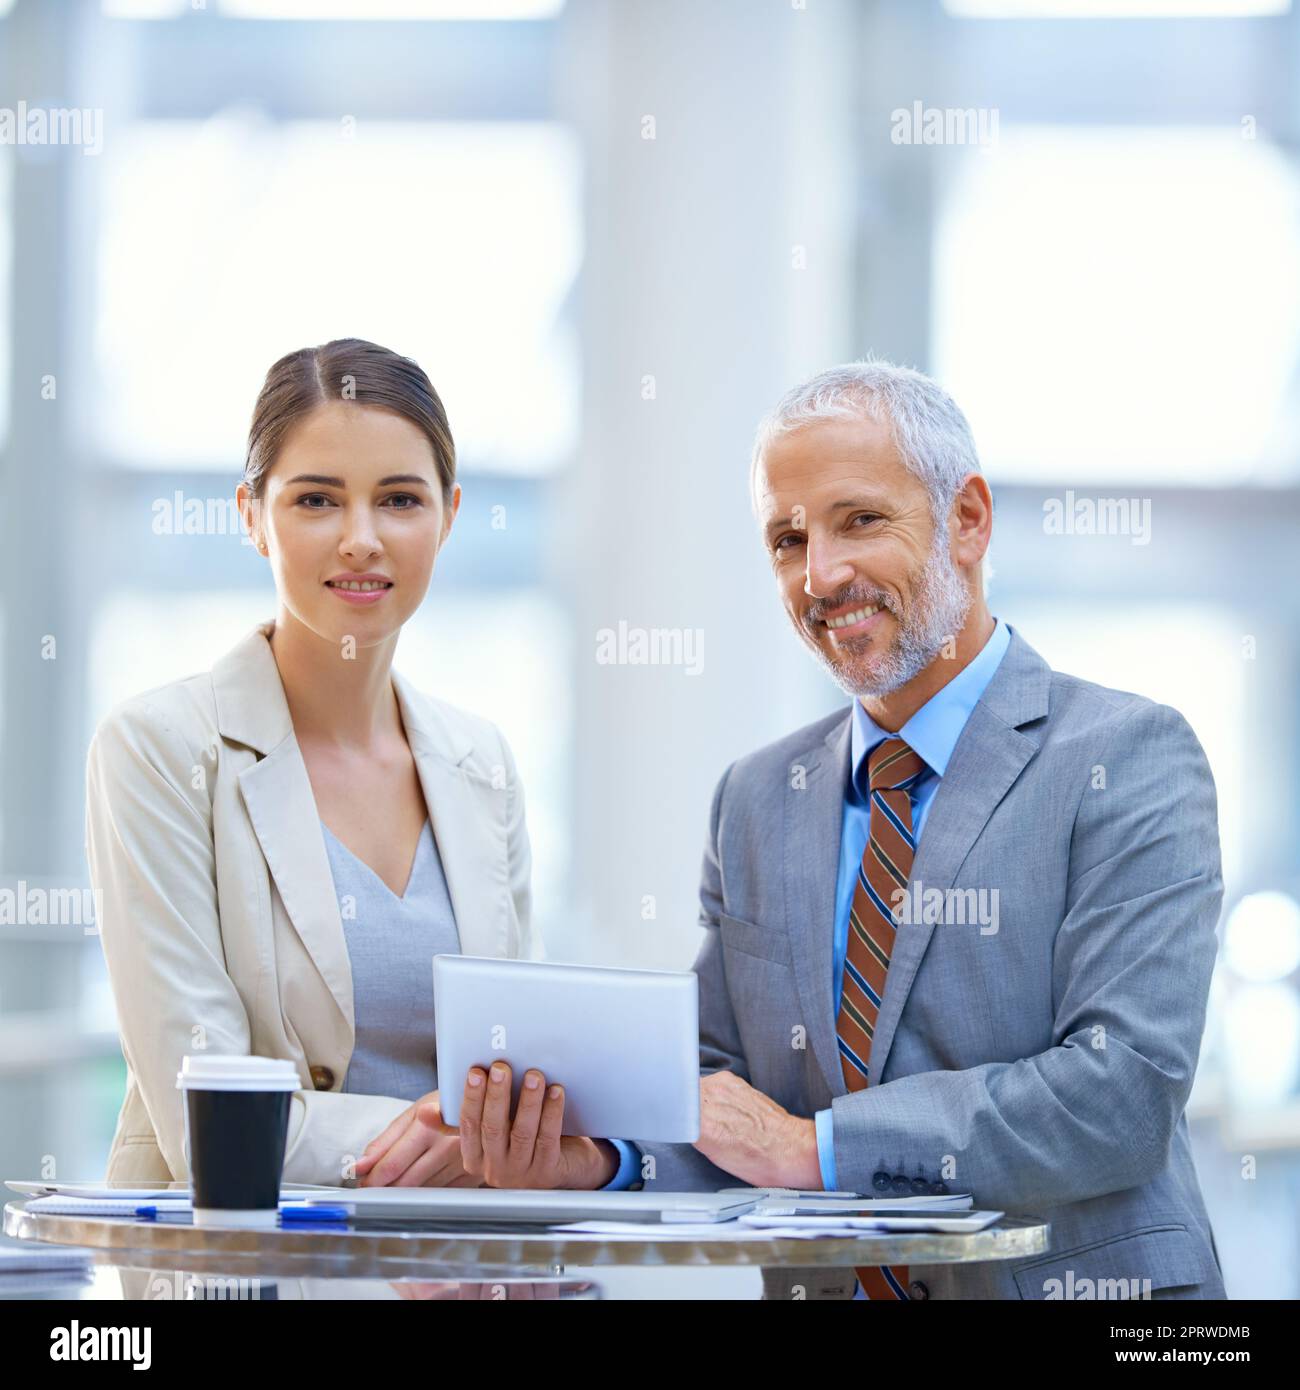 Combining talent and experience. Portrait of two business colleagues standing with a digital tablet. Stock Photo